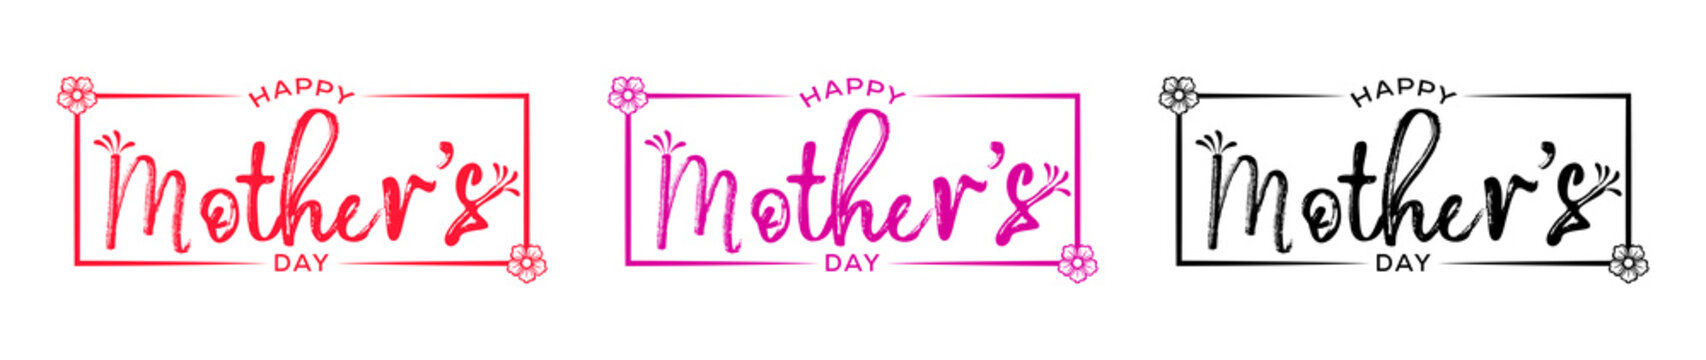 Vector happy mothers day typography poster with heart and flowers.